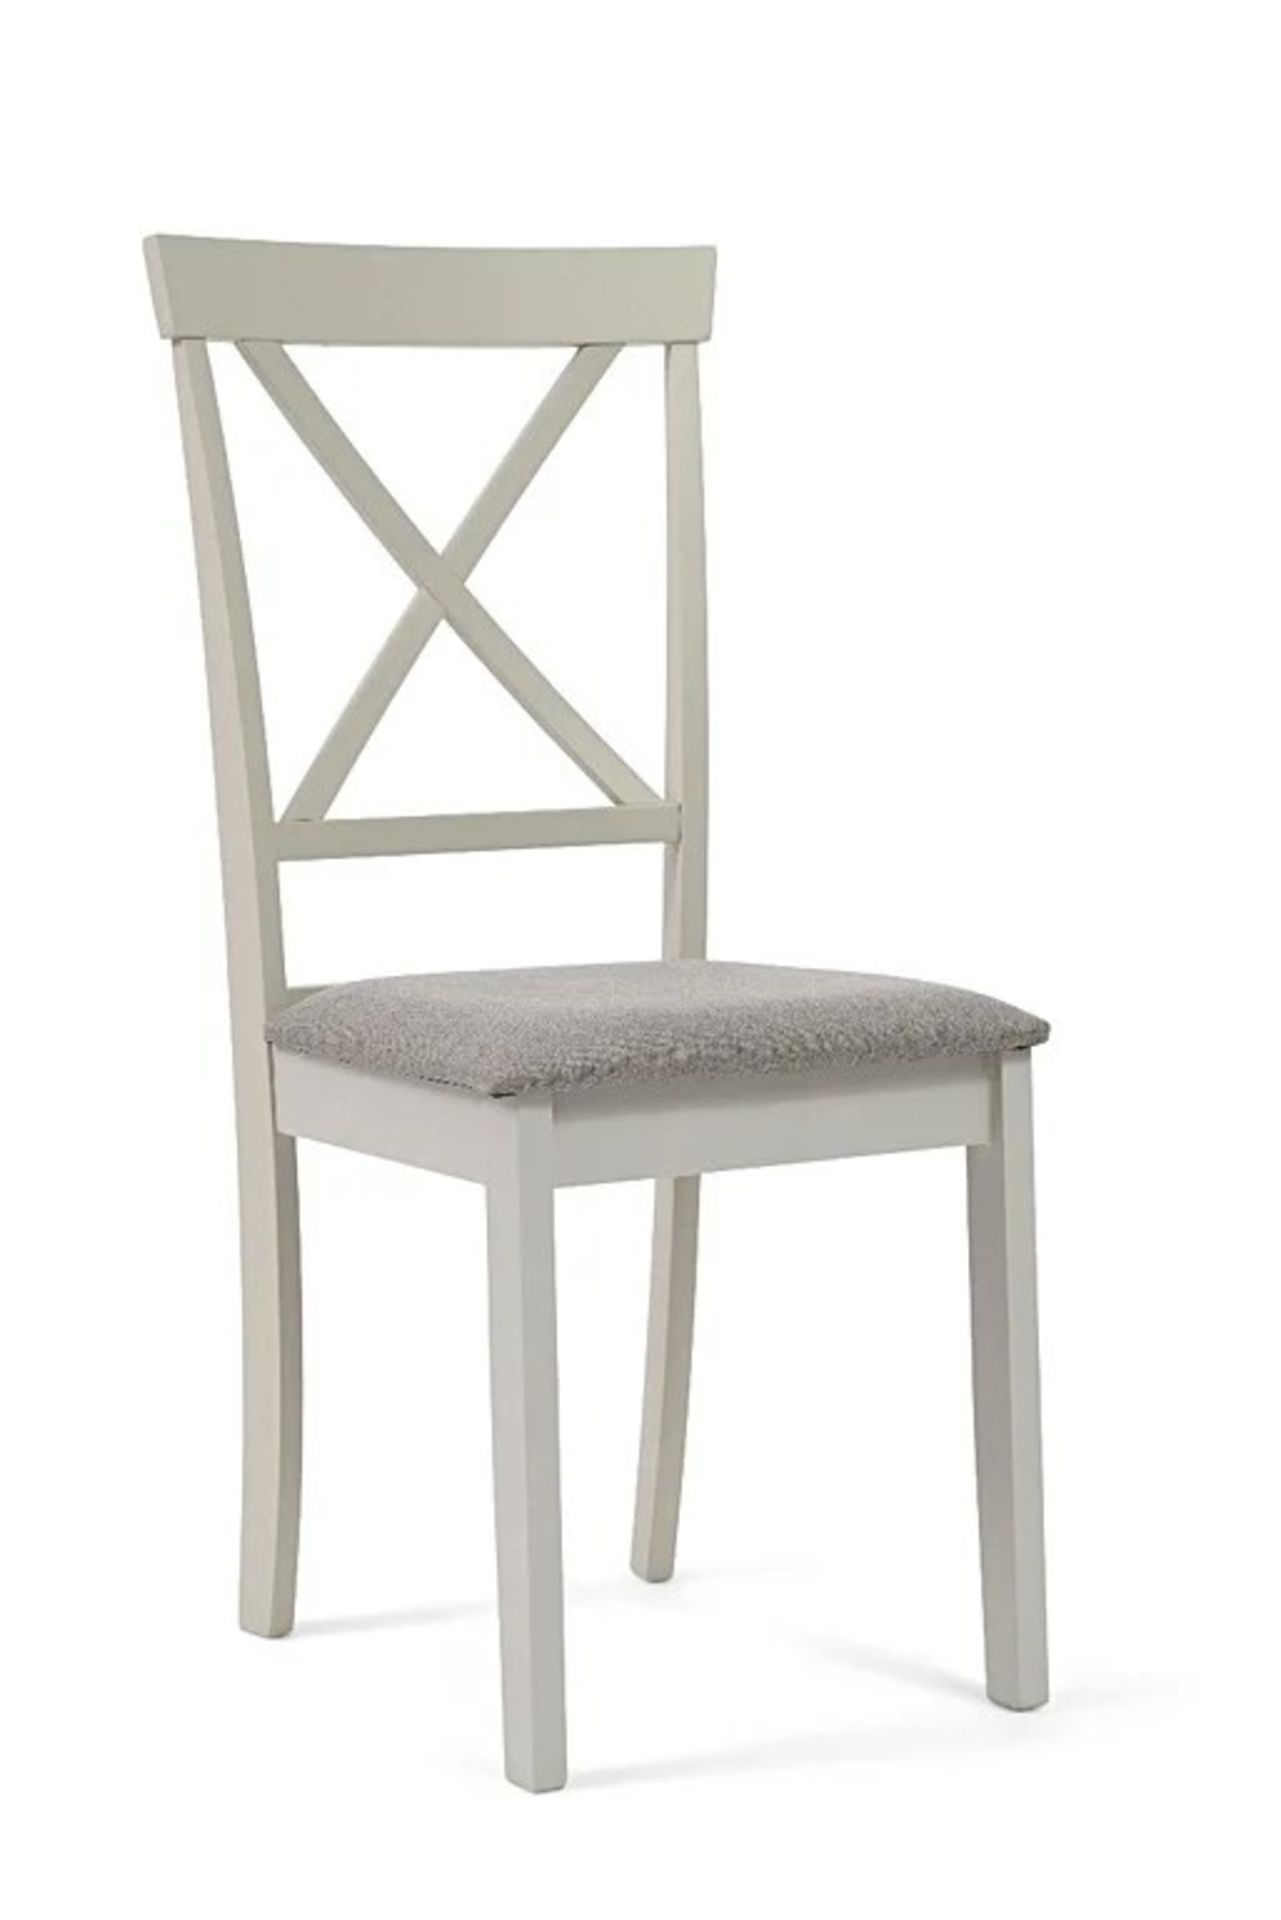 A set of 2 x Epsom Oak Dining ChairWith grey Fabric Seat Epsom collection features a charming